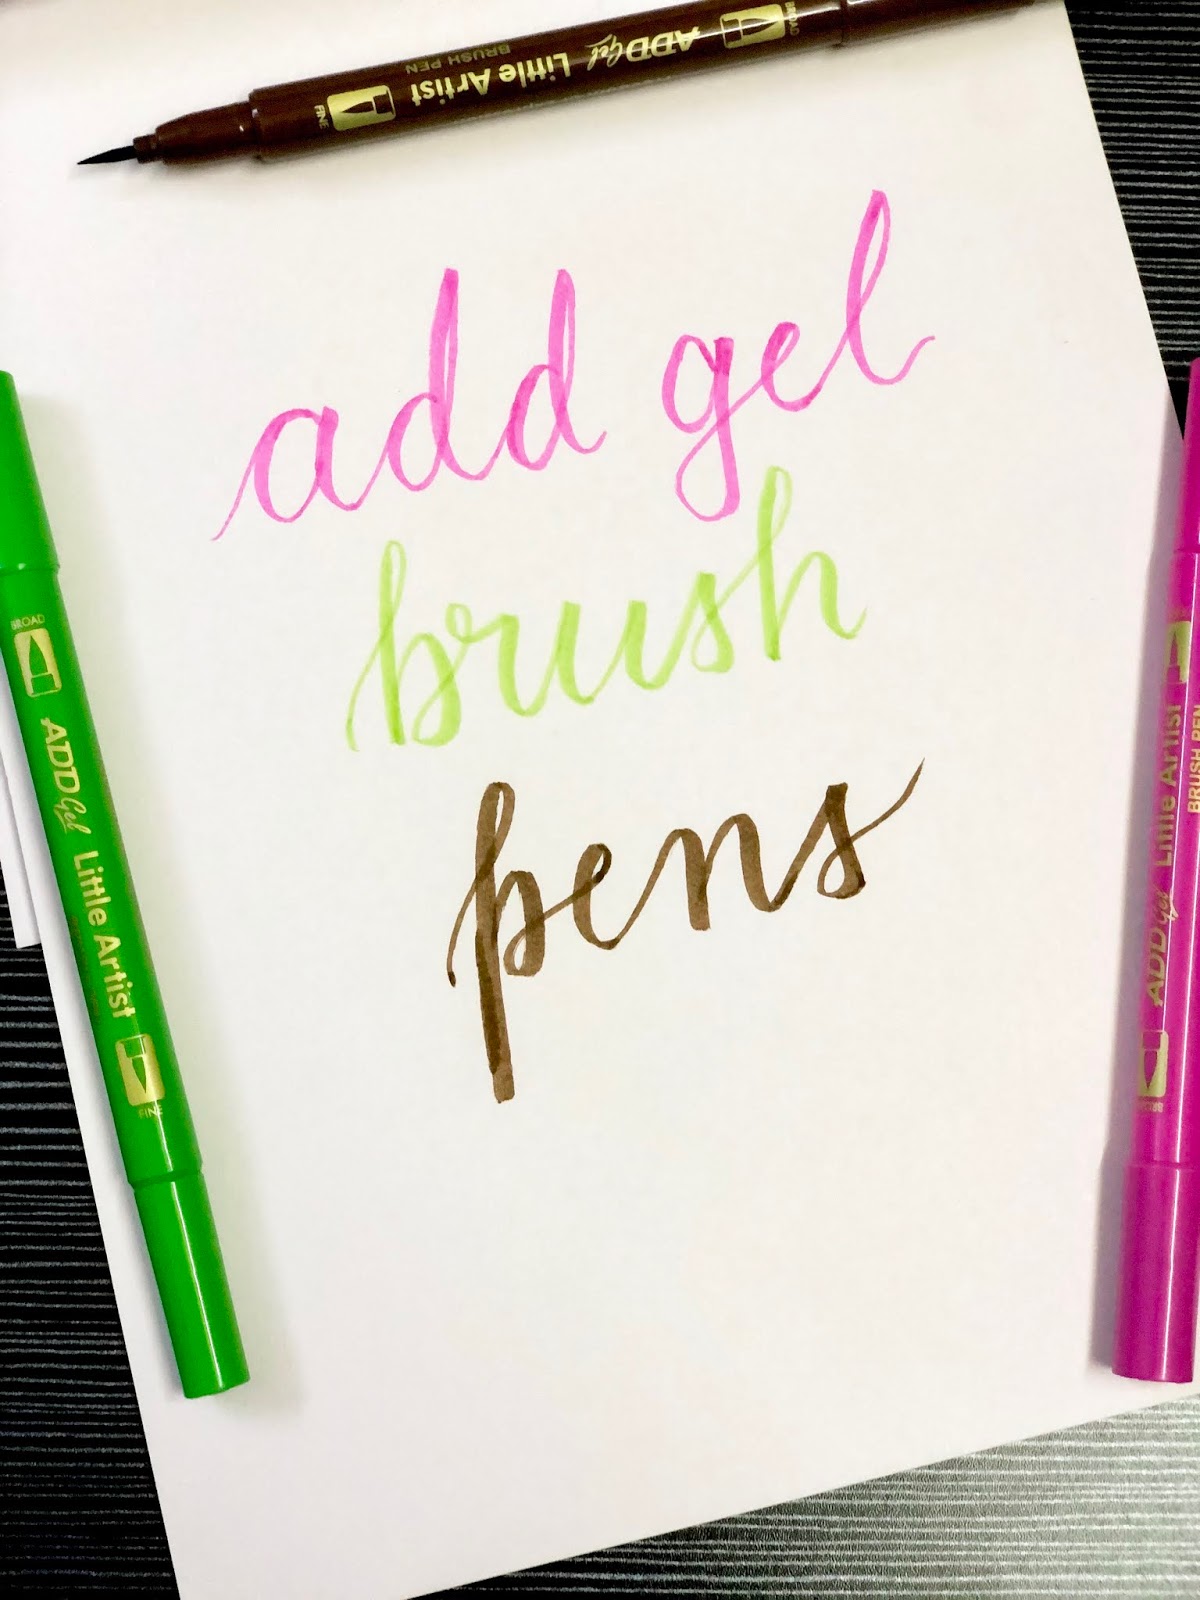 Camlin Brush Pens Calligraphy  Review and Basics of Brush Calligraphy 